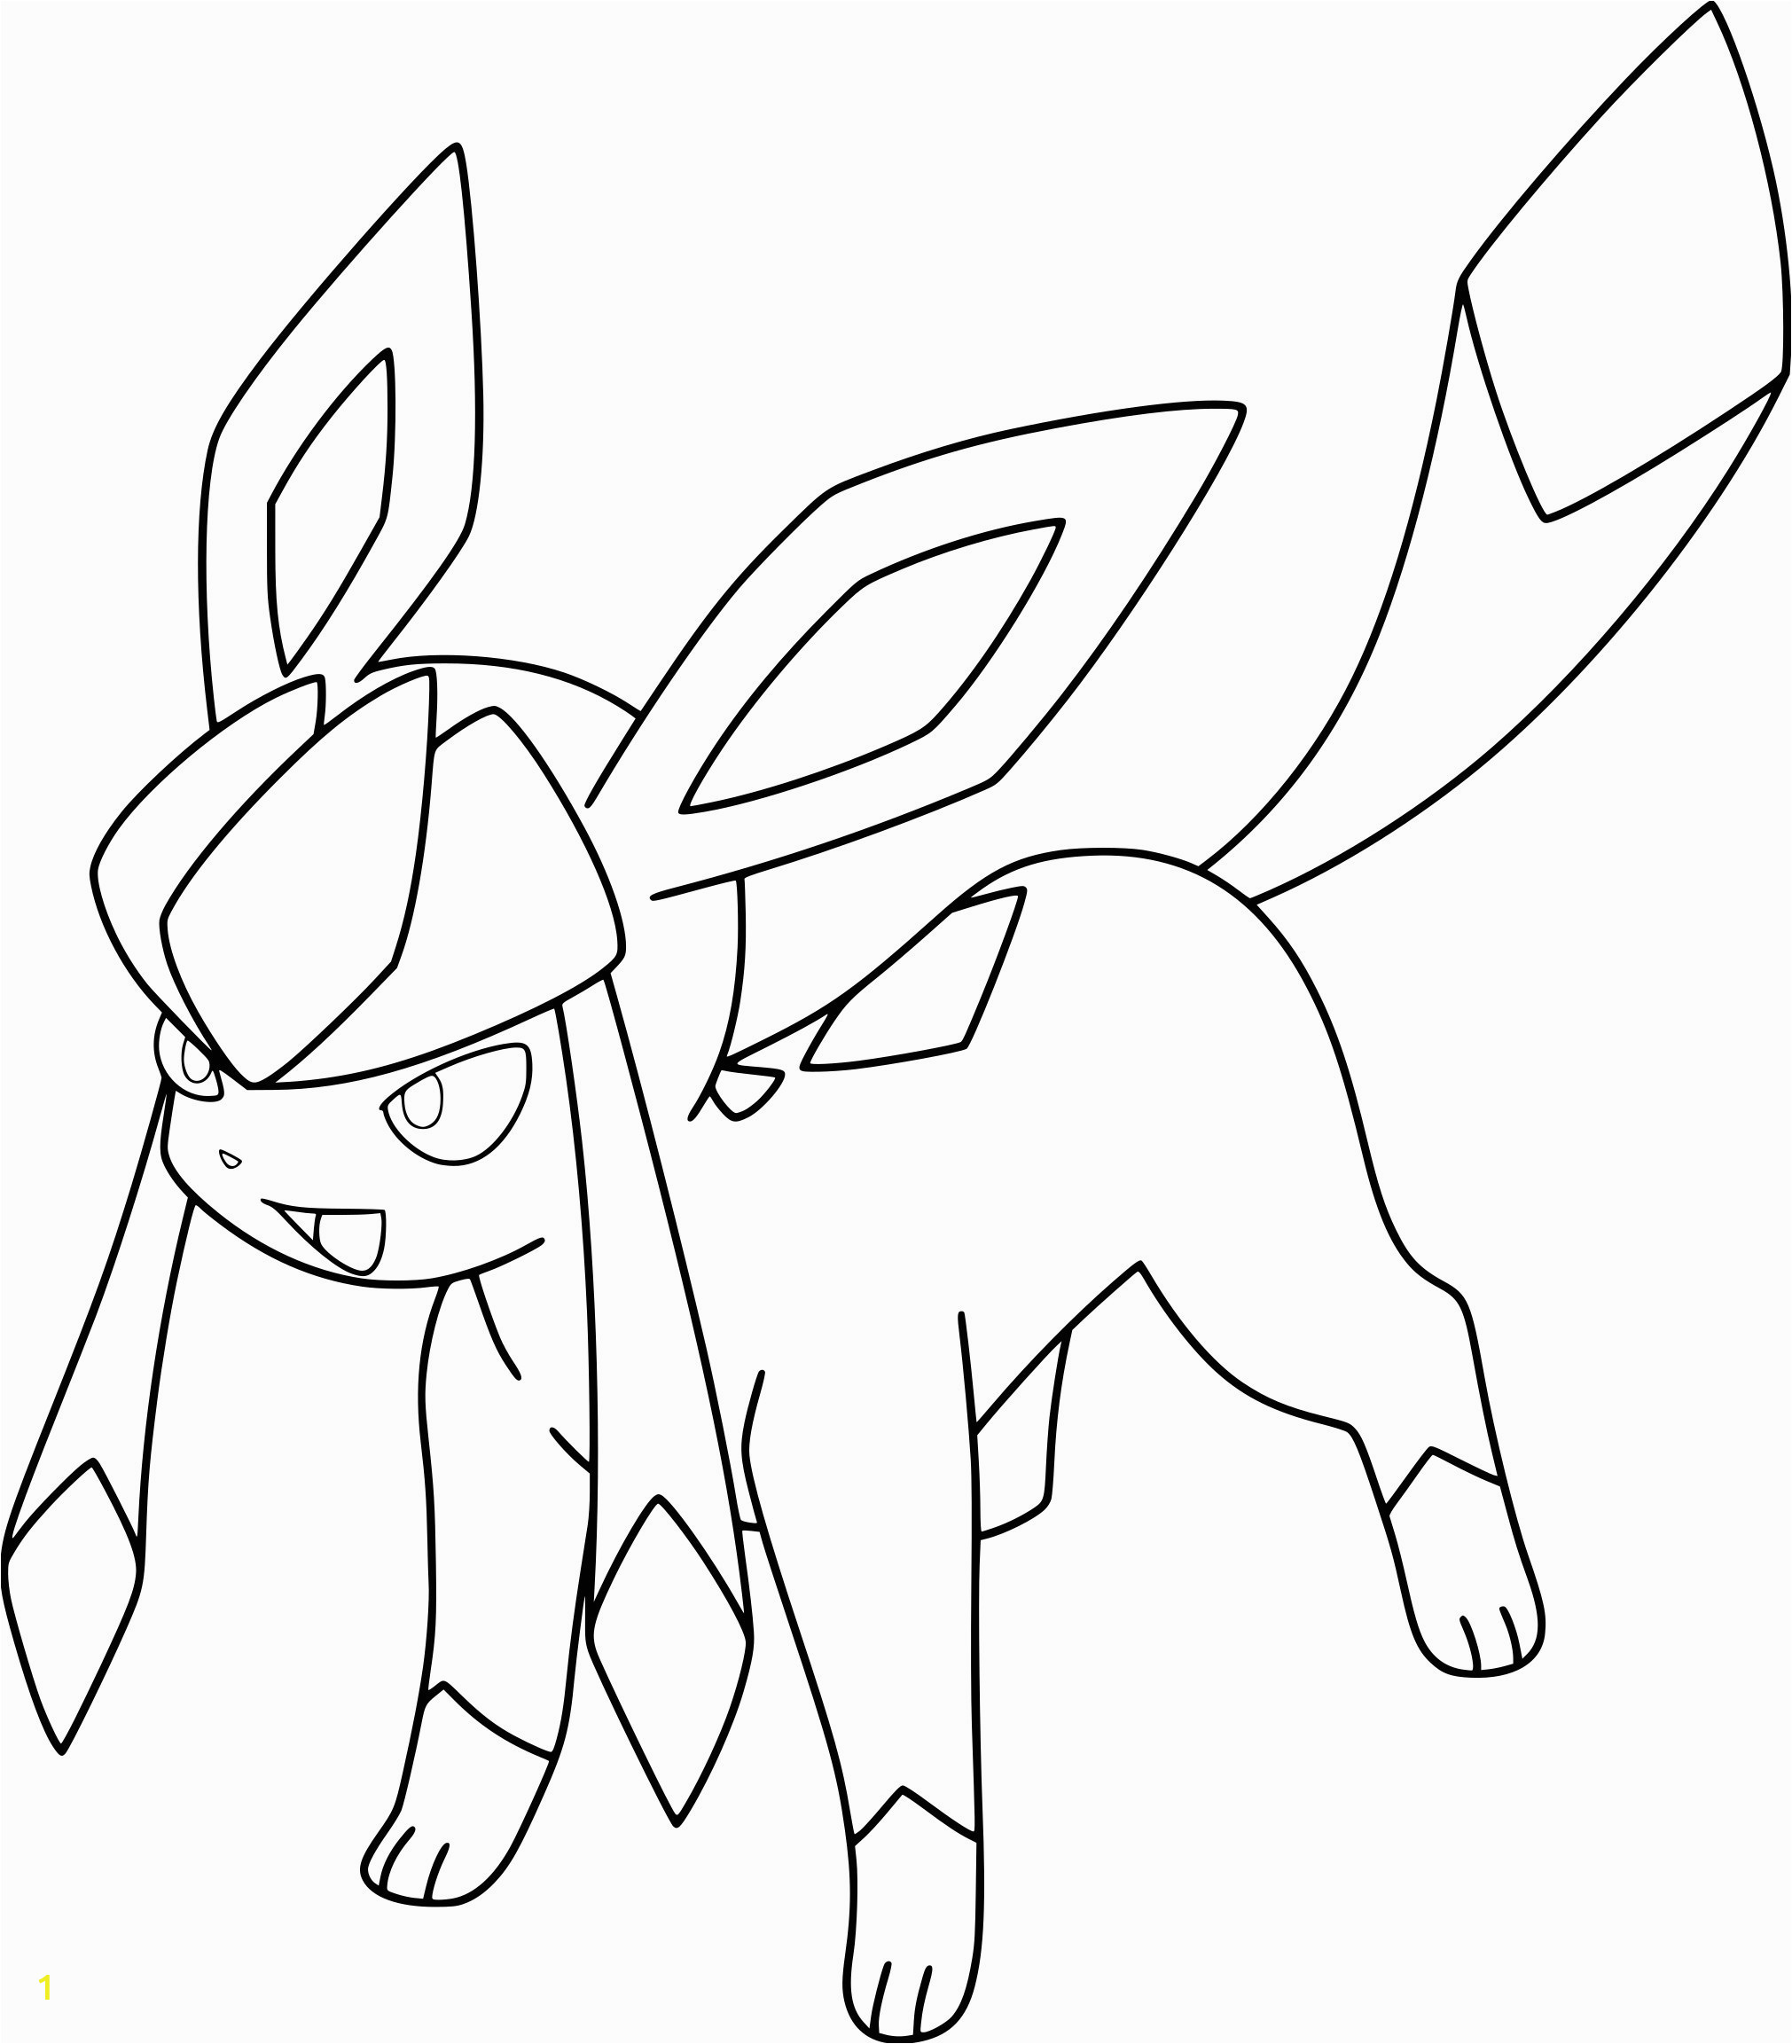 Pokemon Coloring Pages Eevee Evolutions together the Best Free Eevee Coloring Page Images Download From